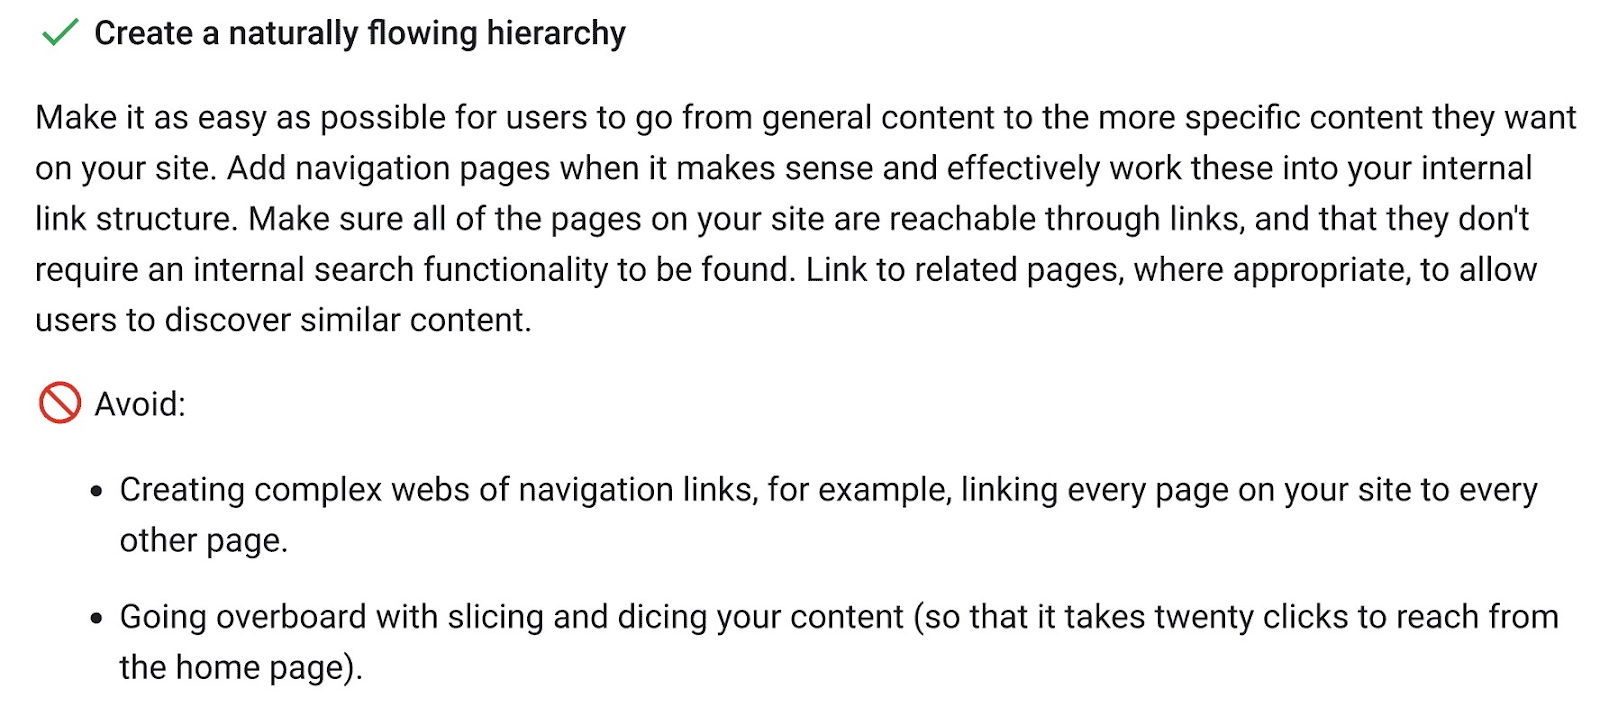 Google’s SEO Starter Guide section on hierarchy